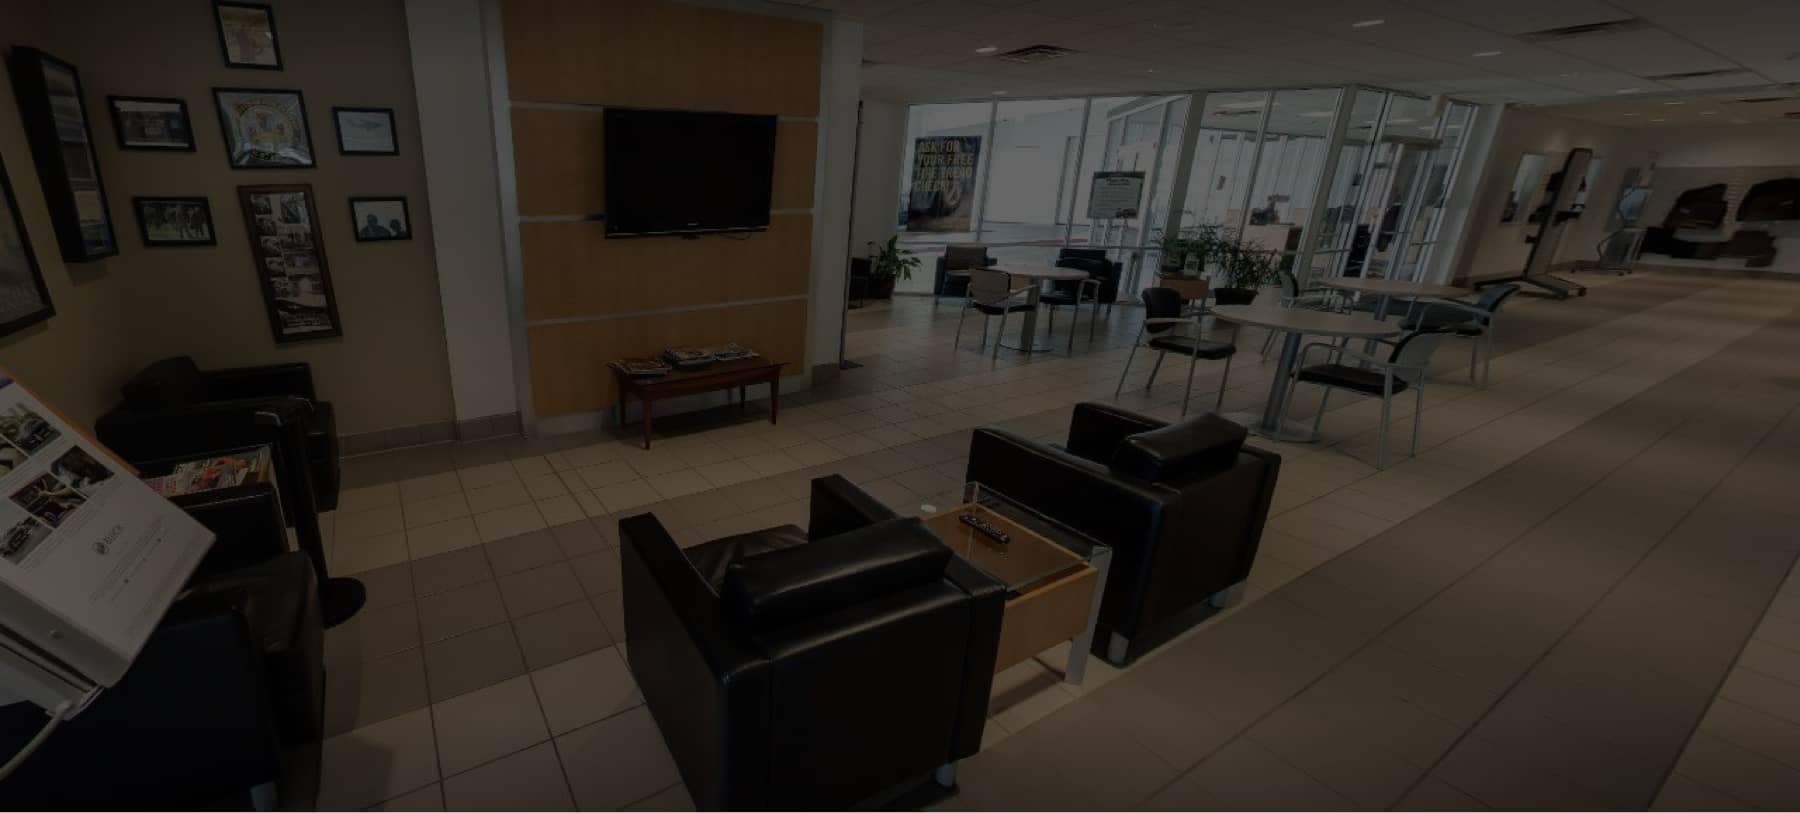 An interior shot of service center lounge area